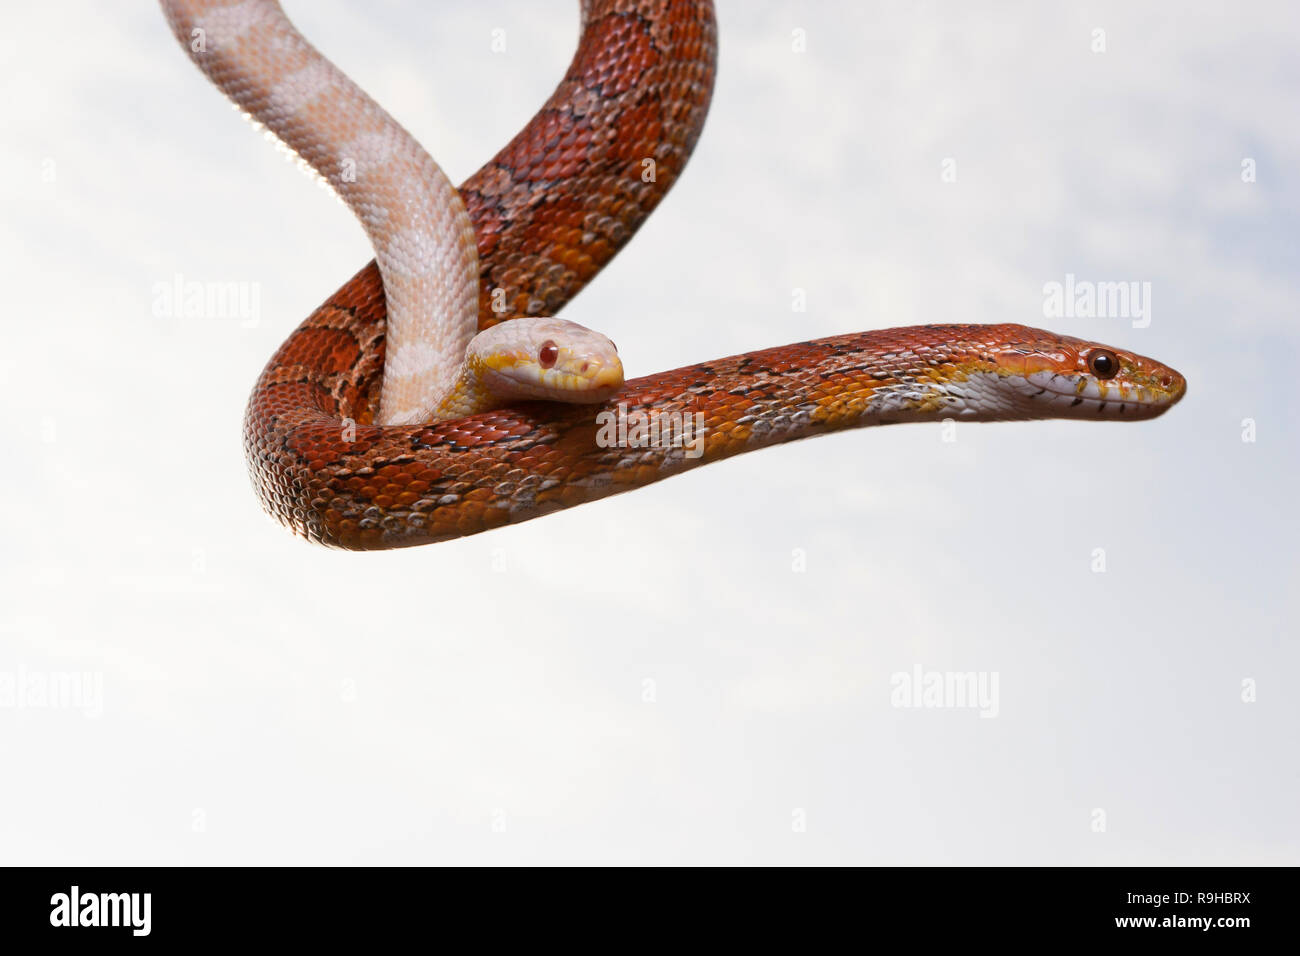 Two corn snakes (Pantherophis guttatus) on a sky background Stock Photo